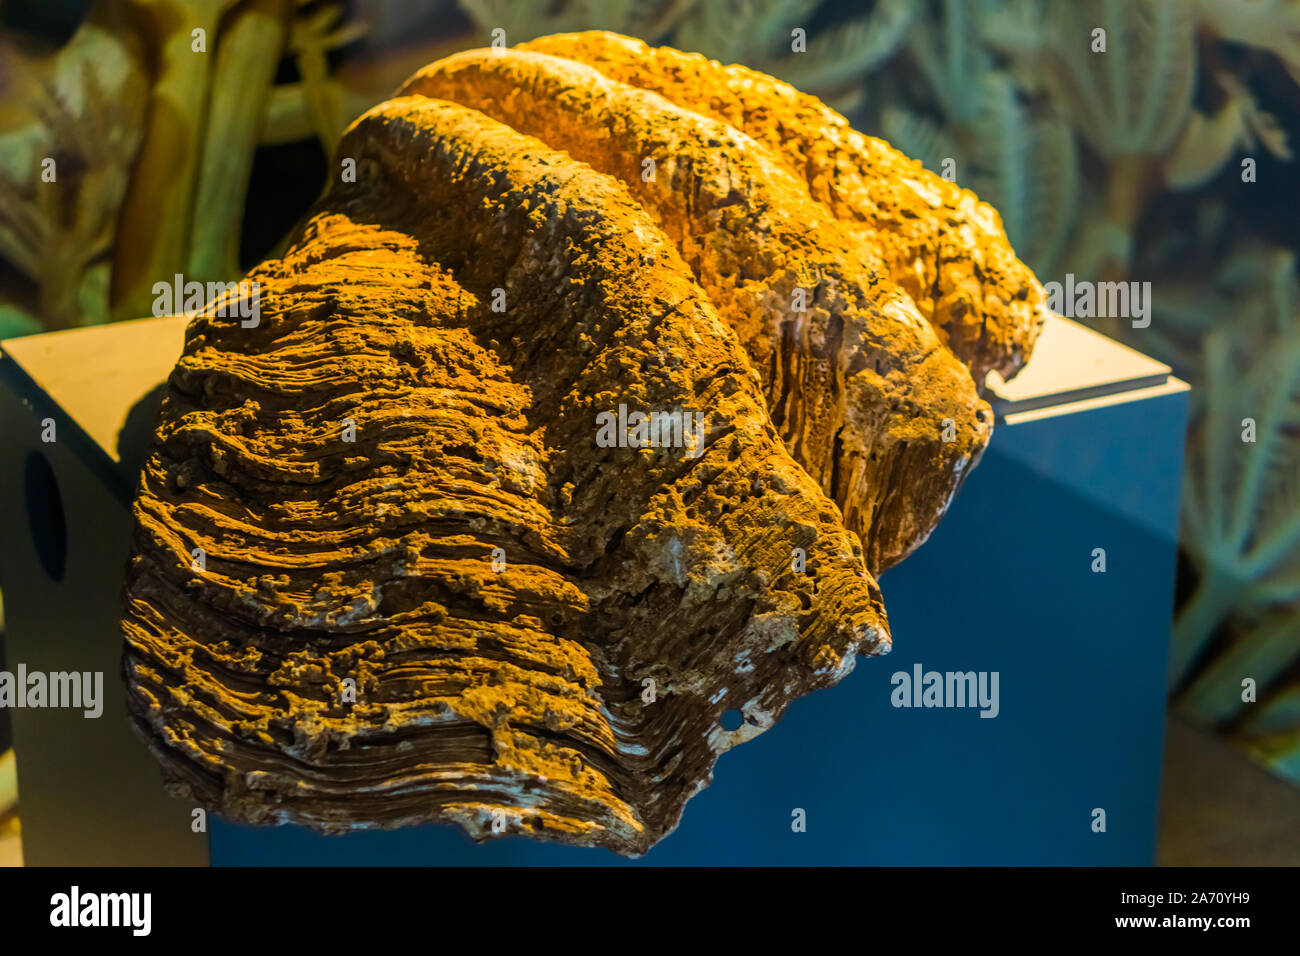 closeup of the shell of giant clam, worlds biggest bivalve specie Stock Photo